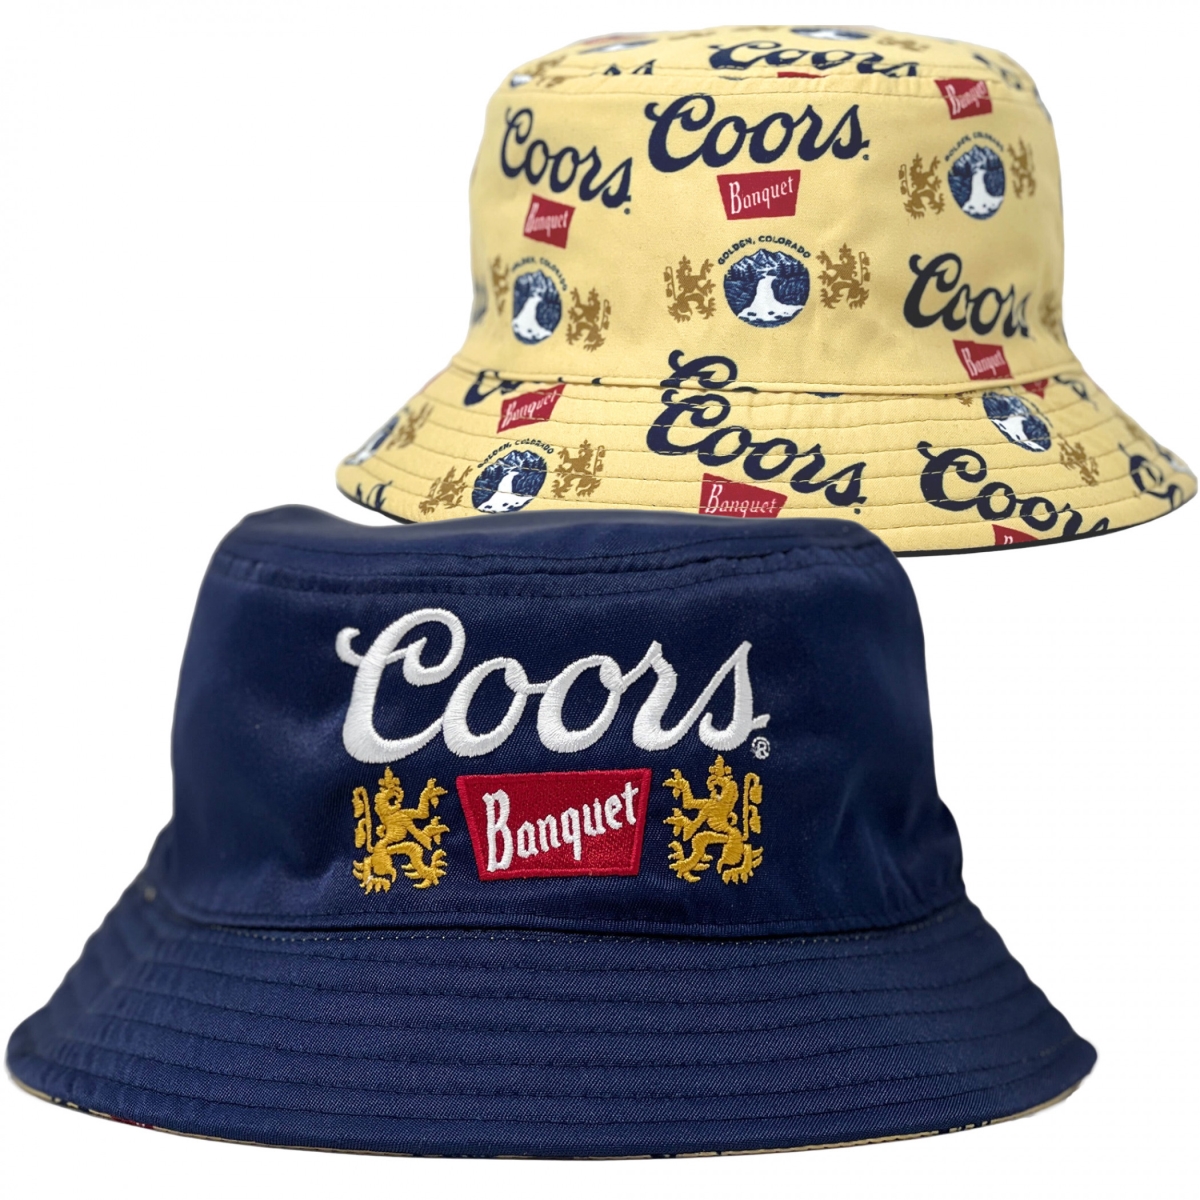 Picture of Coors 830943 Coors Banquet Beer Brand & All Over Logos Reversible Text Bucket Hat